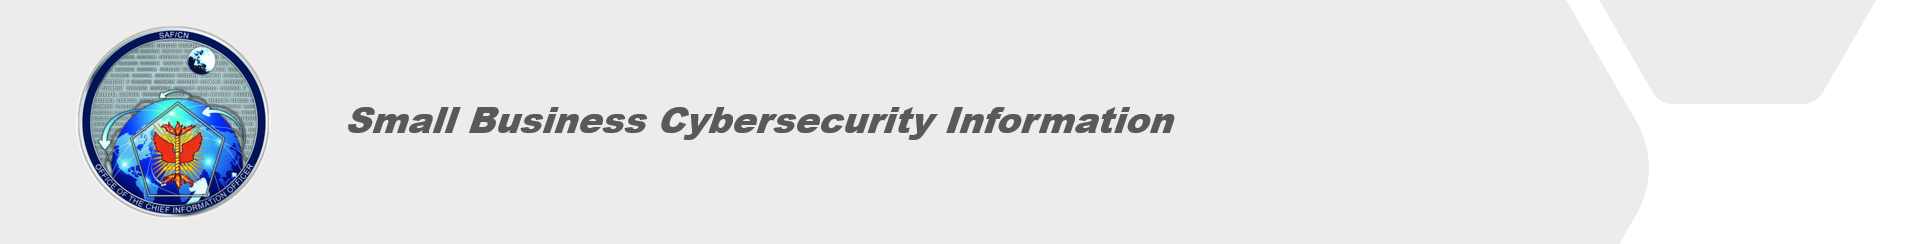 Small Business Cybersecurity Information Banner